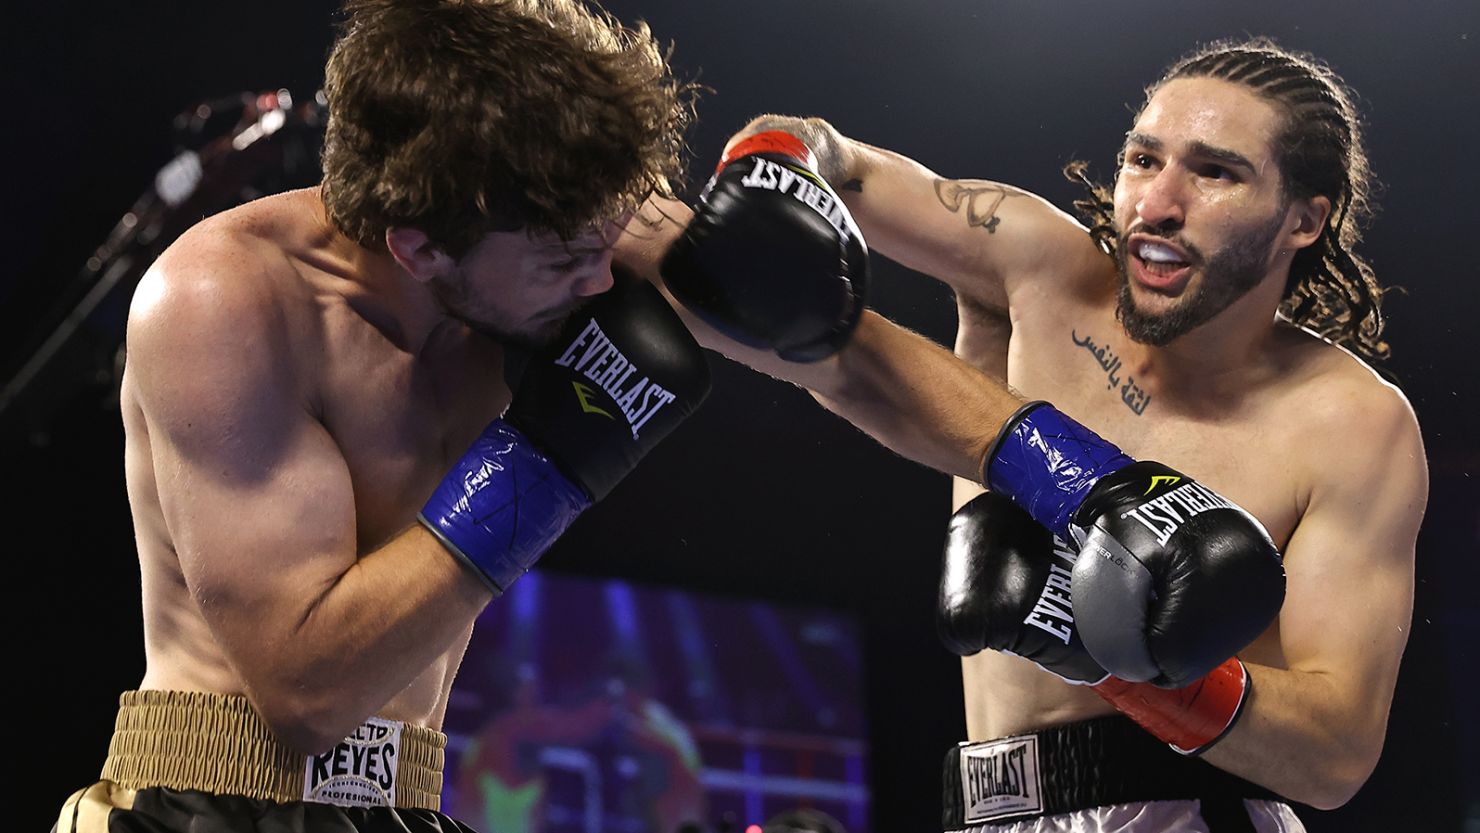 Jordan Weeks (L) and Nico Ali Walsh (R) exchange punches during their fight at the Hard Rock Hotel & Casino Tulsa on August 14, 2021 in Catoosa, Oklahoma. 